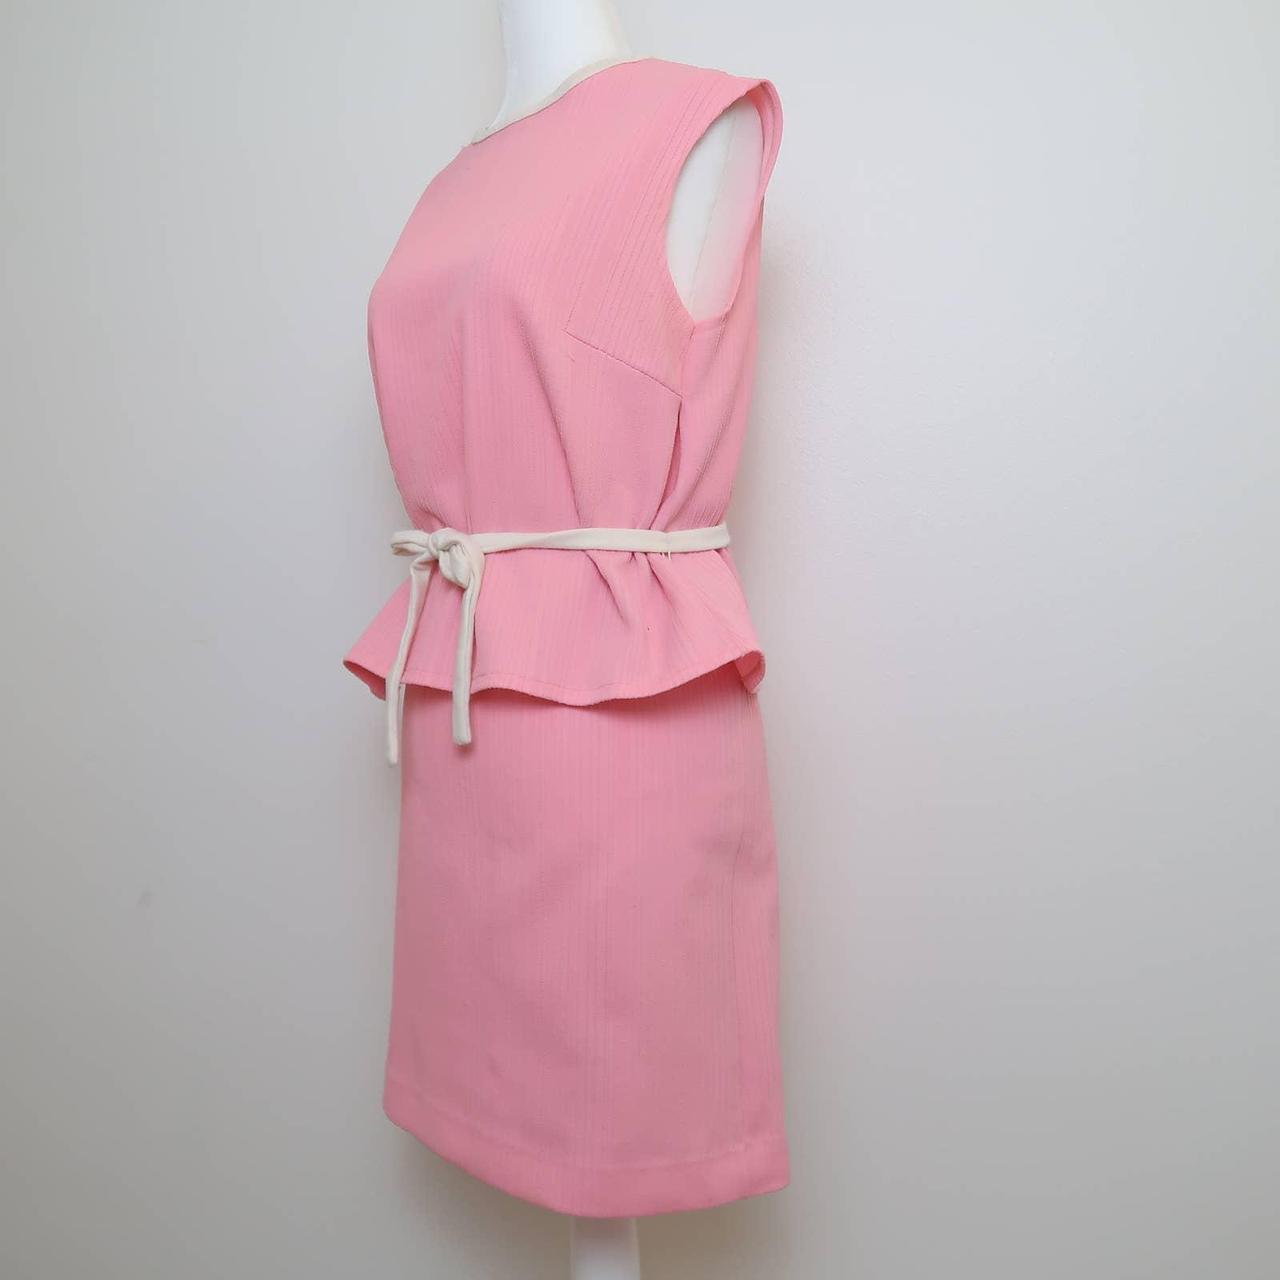 Product Image 2 - Vintage 60s bubblegum pink and